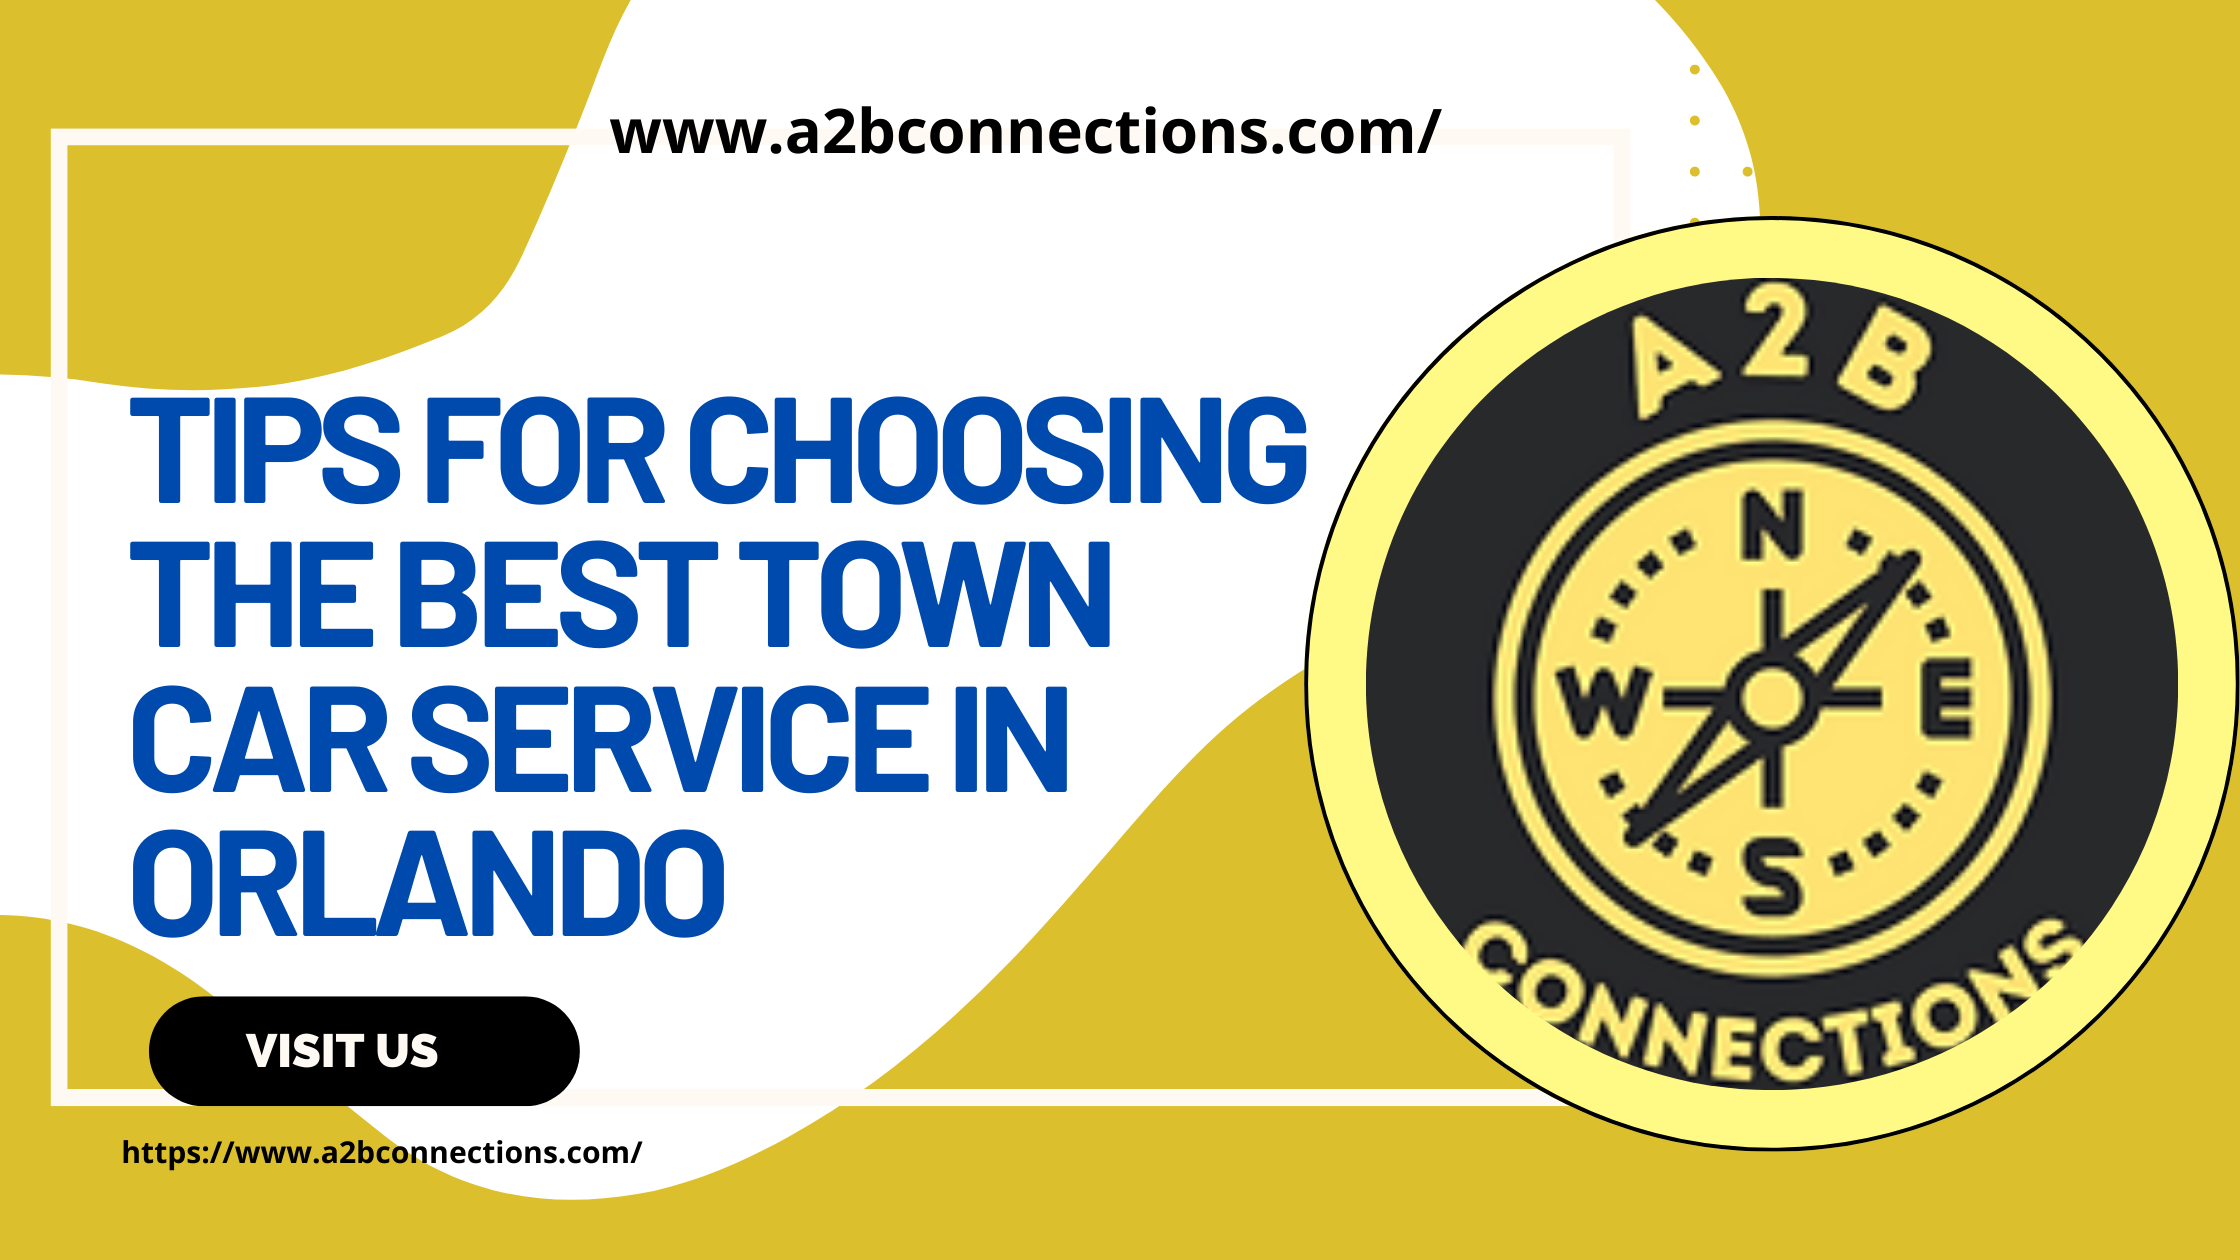 Tips for Choosing the Best Town Car Service in Orlando